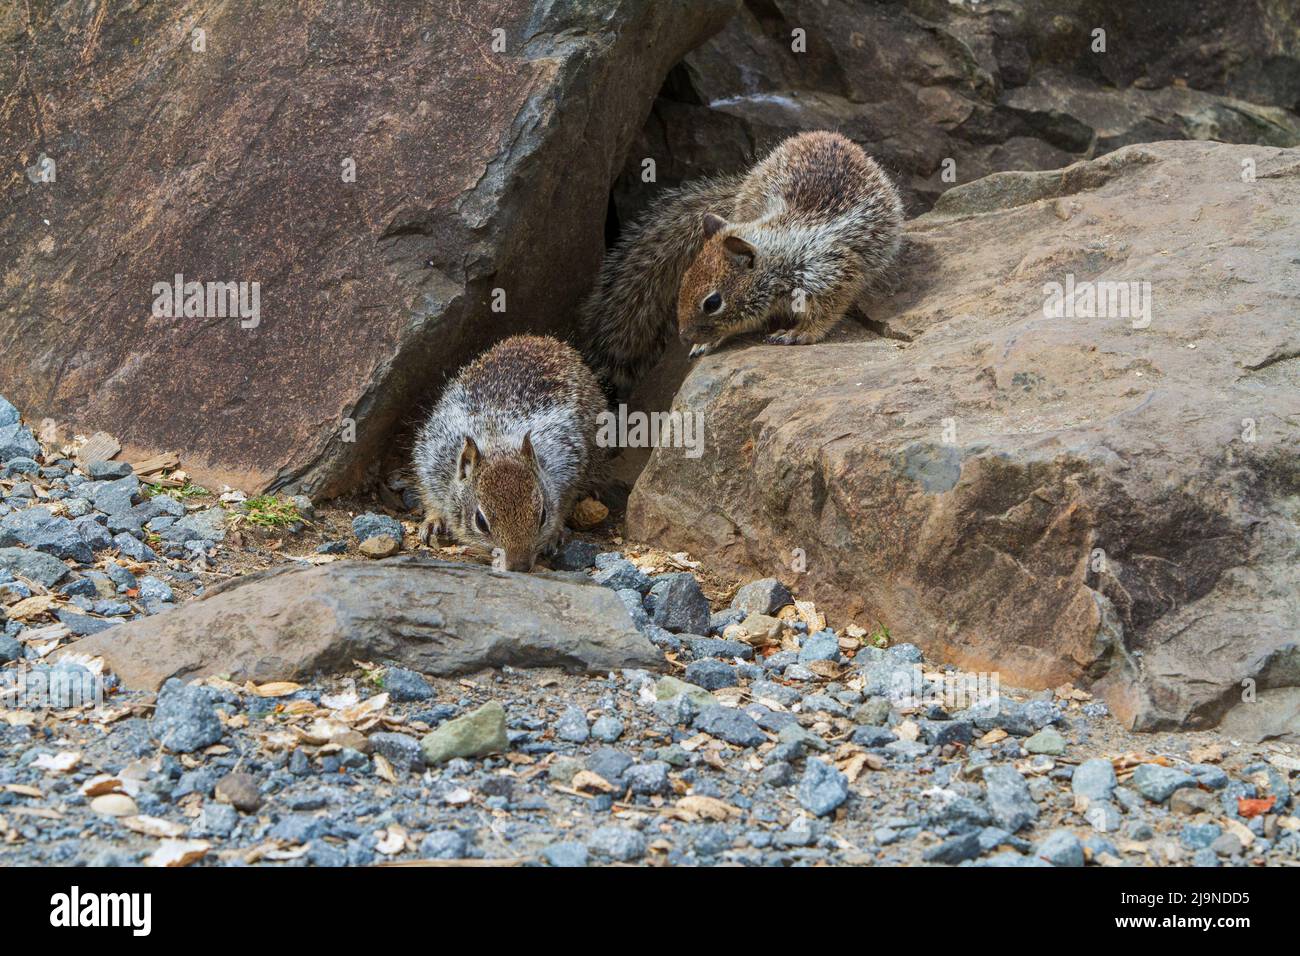 Two young Beechey or California ground squirrels (Otospermophilus beecheyi) search for food among the rocks at a popular tourist spot in Oregon, USA. Stock Photo